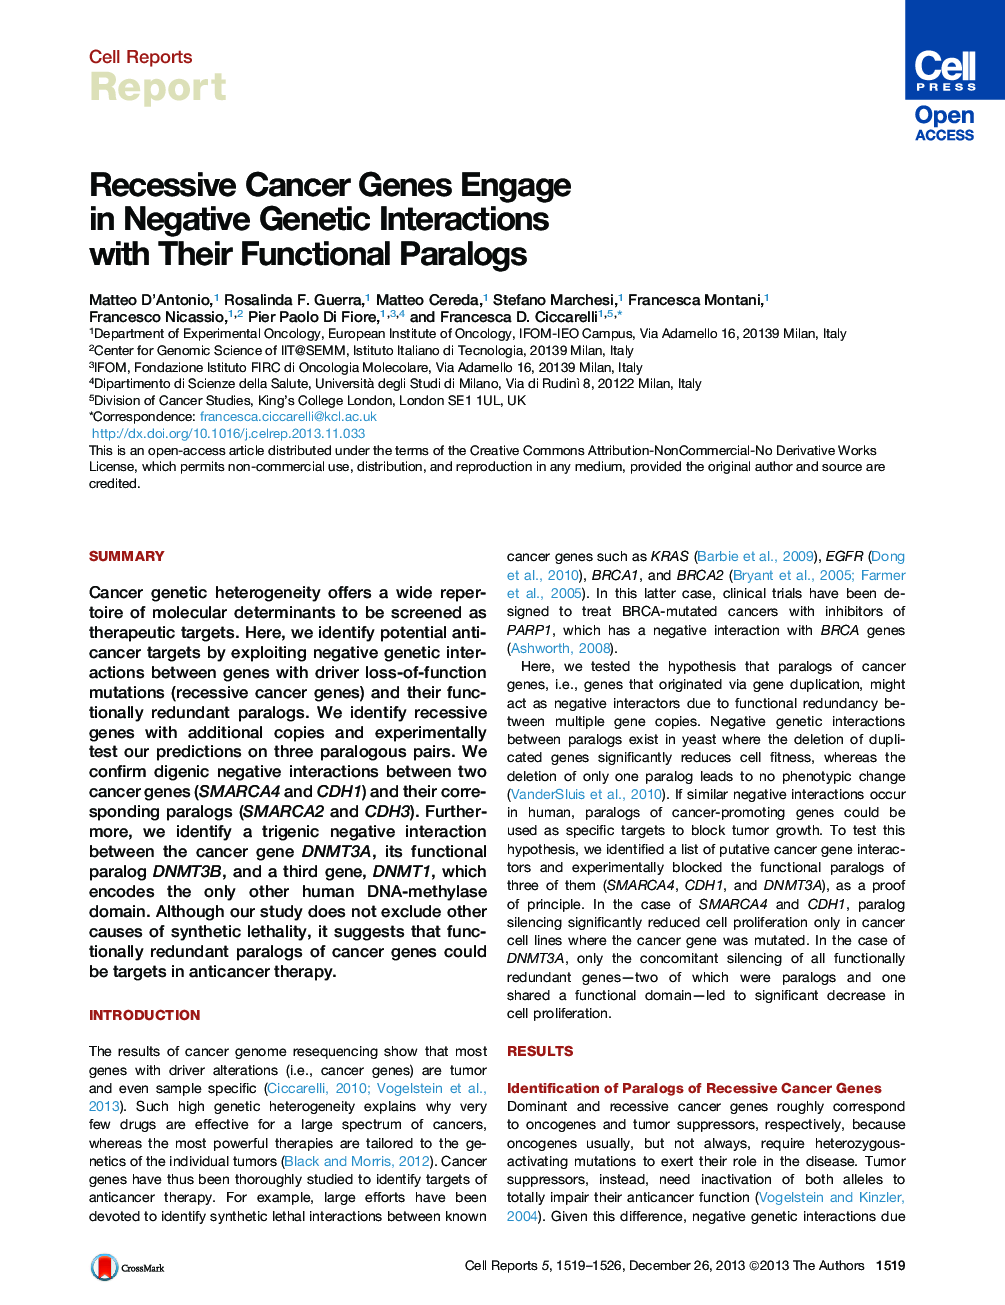 Recessive Cancer Genes Engage in Negative Genetic Interactions with Their Functional Paralogs 